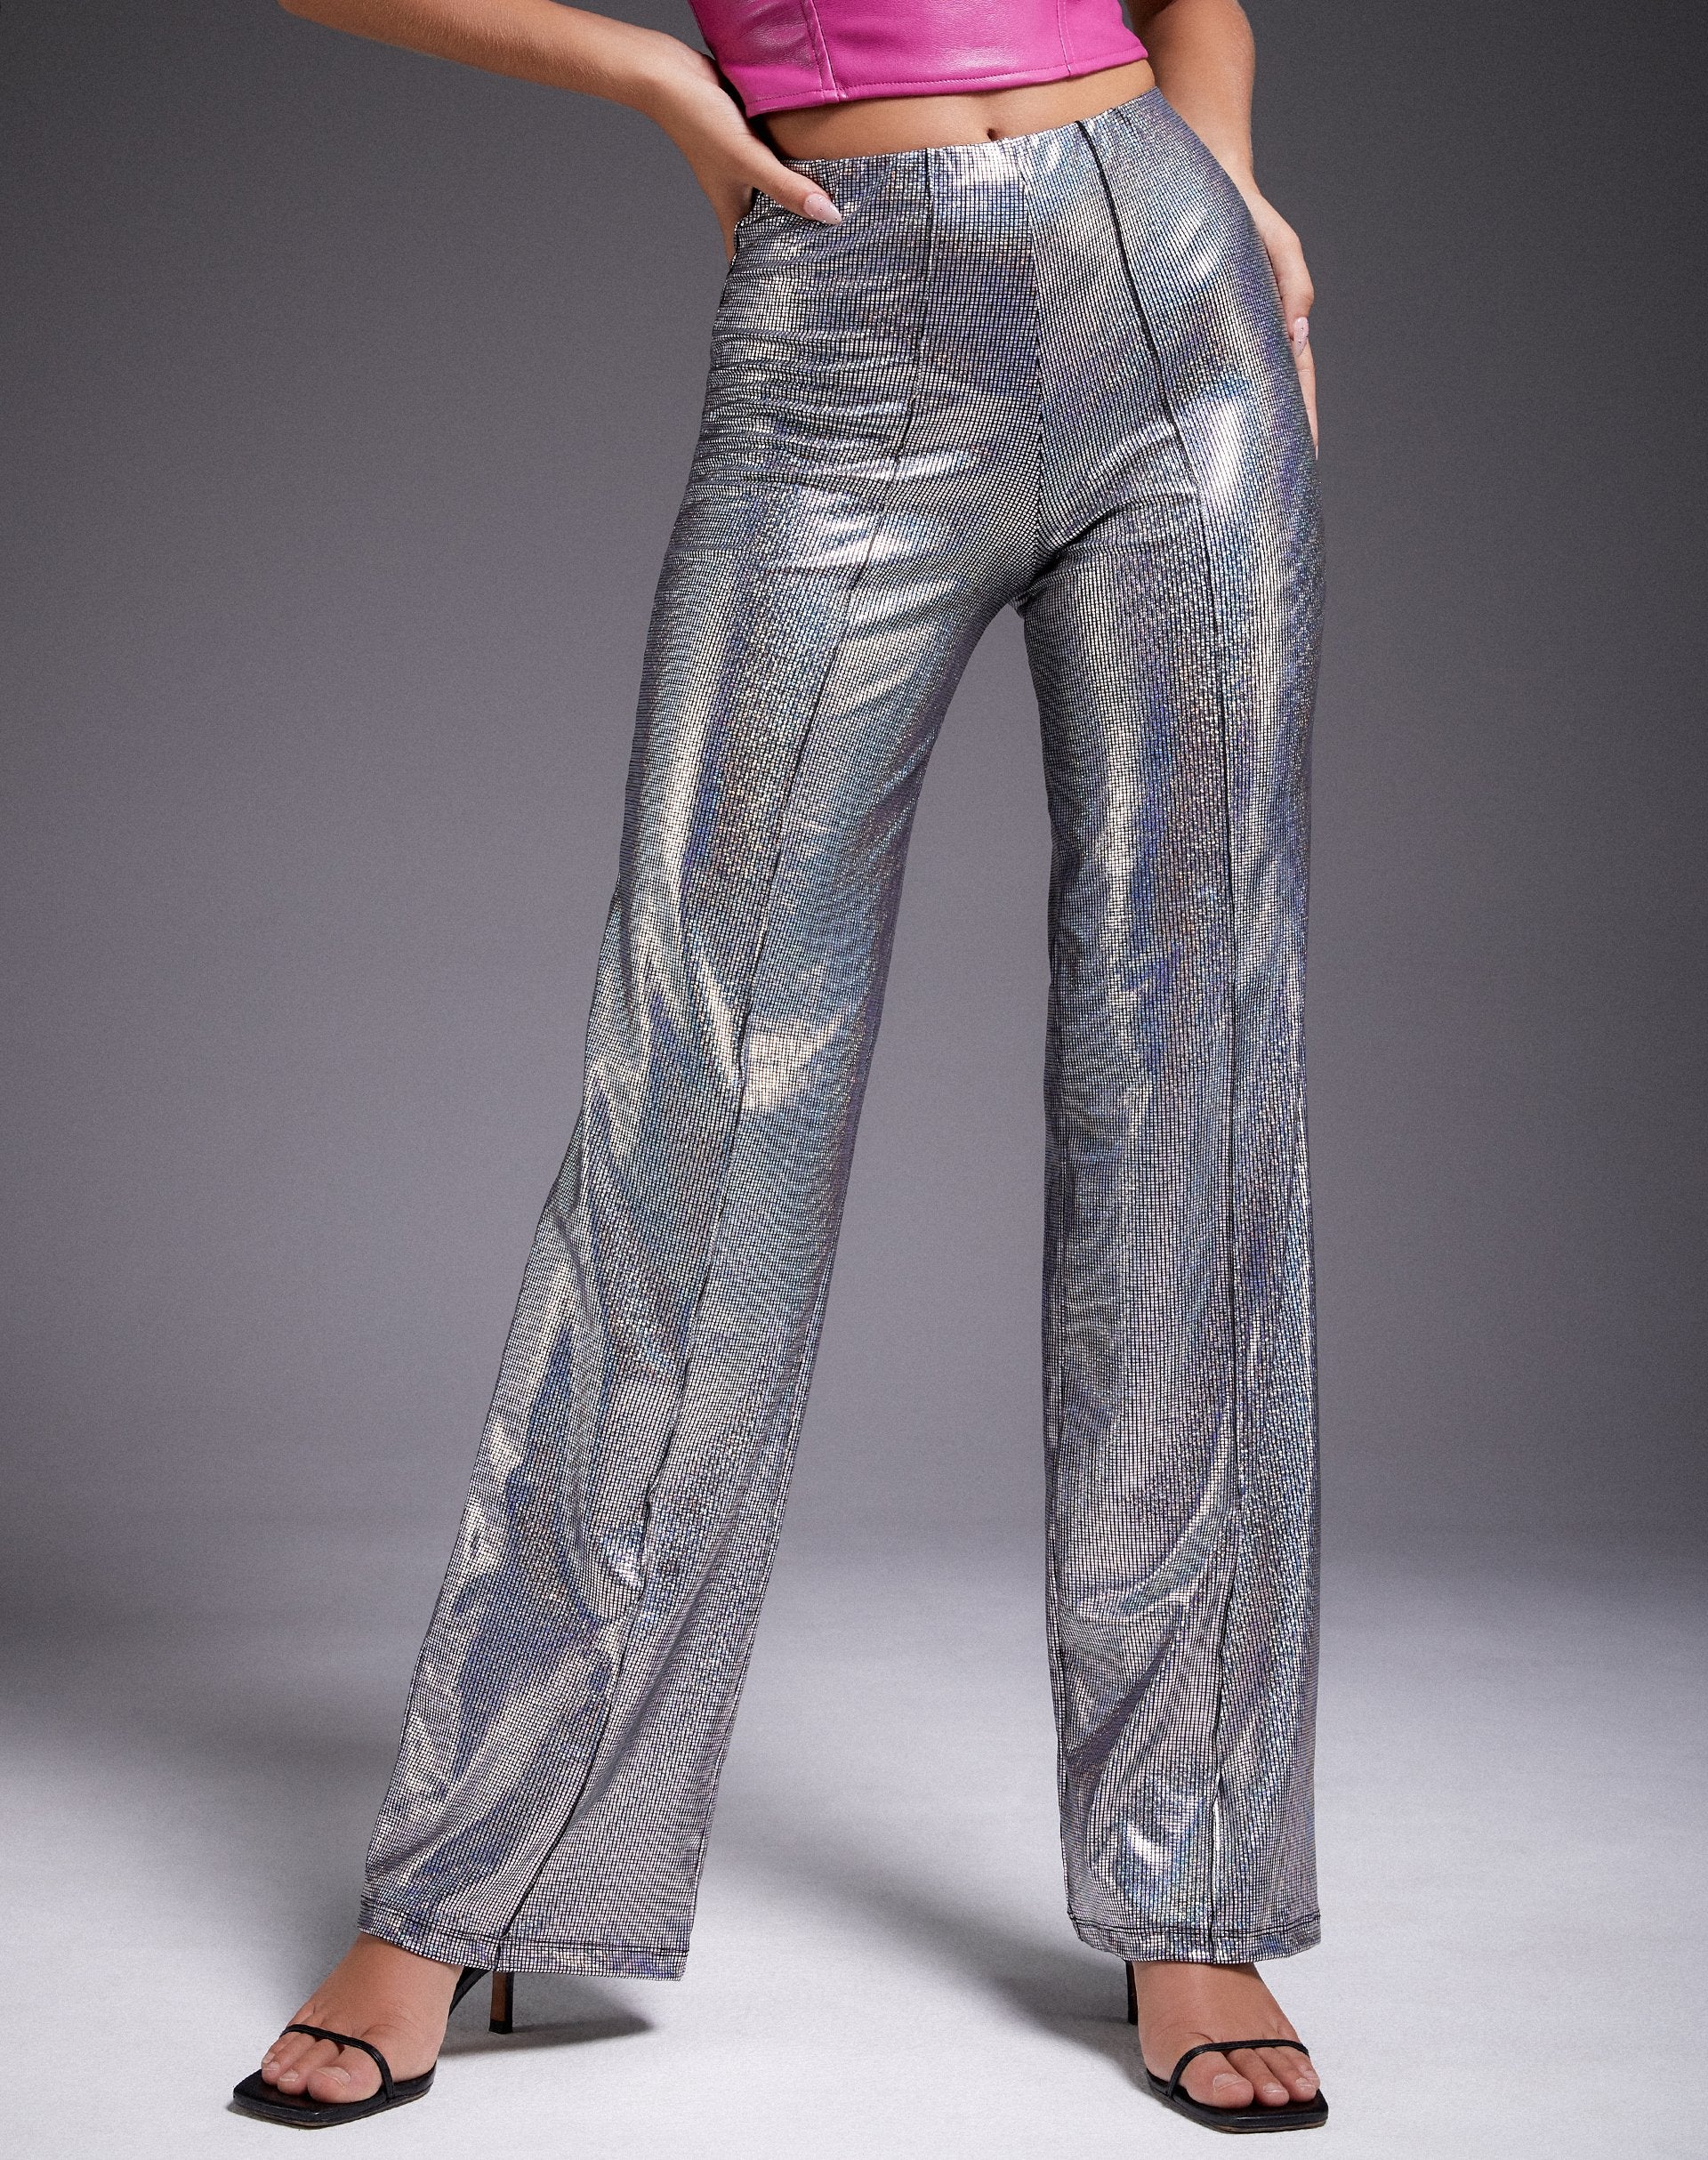 Image of Pista Trouser in Holographic Silver